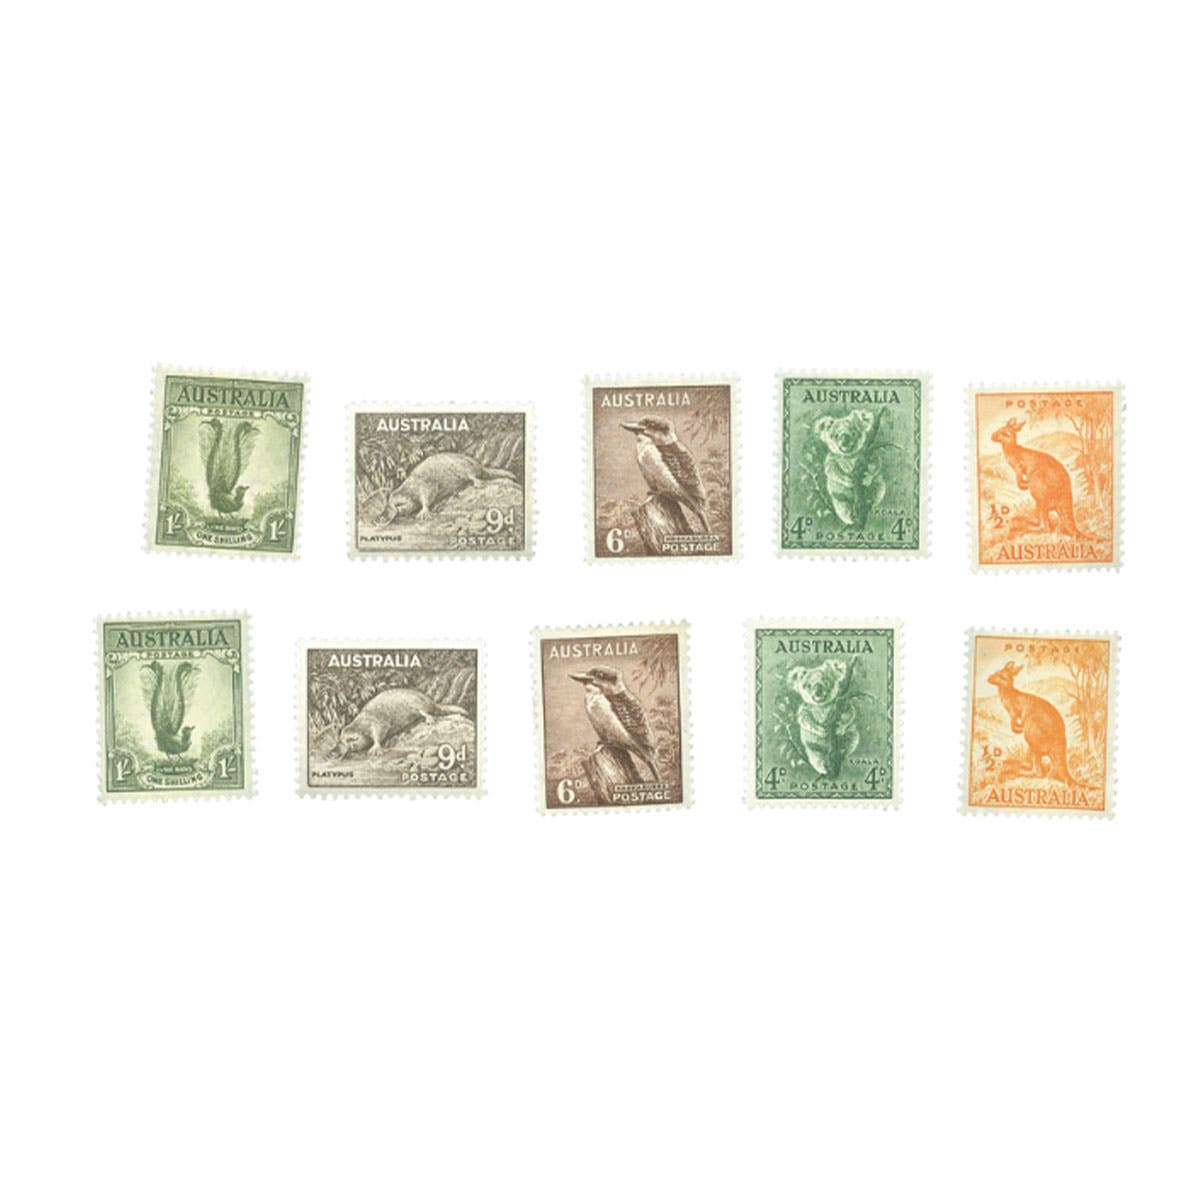 1942-58 ½d, 4d, 6d, 9d, 1/- Zoological Watermark & No Watermark 10-Stamp Set Mint Unhinged